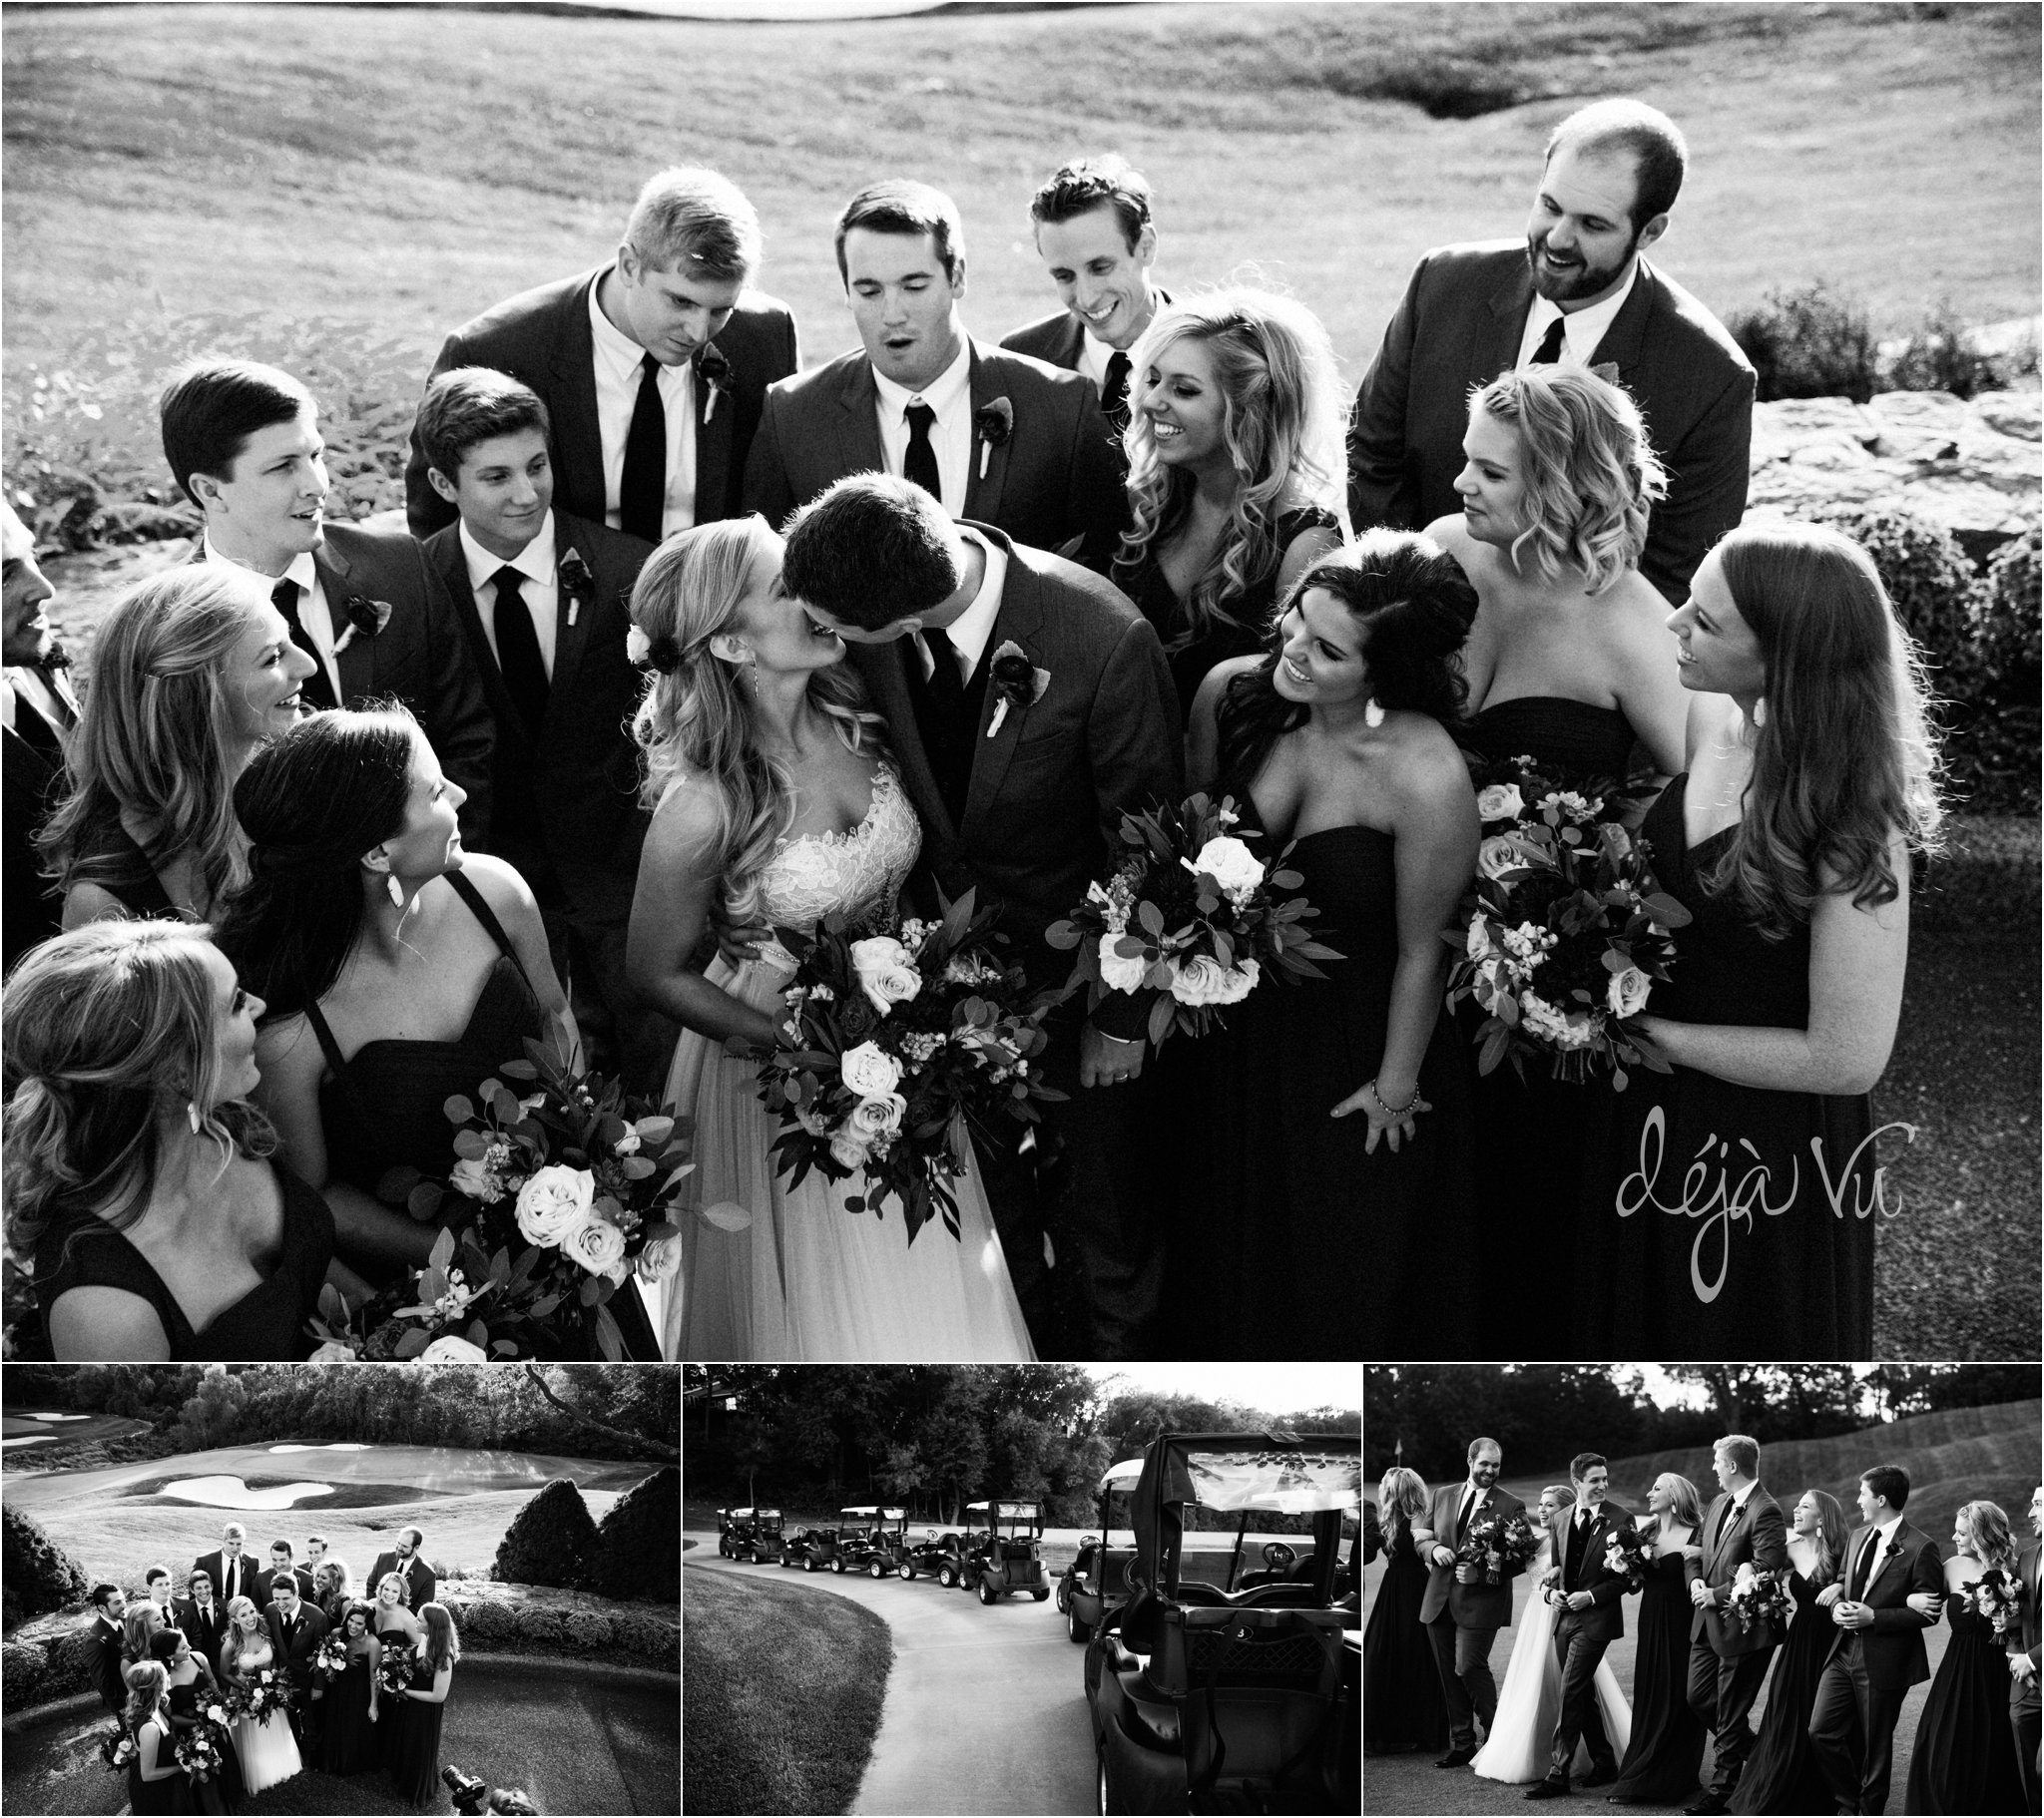 Shadow Glen Country Club Wedding | contemporary bridal party | Images by: www.feliciathephotographer.com